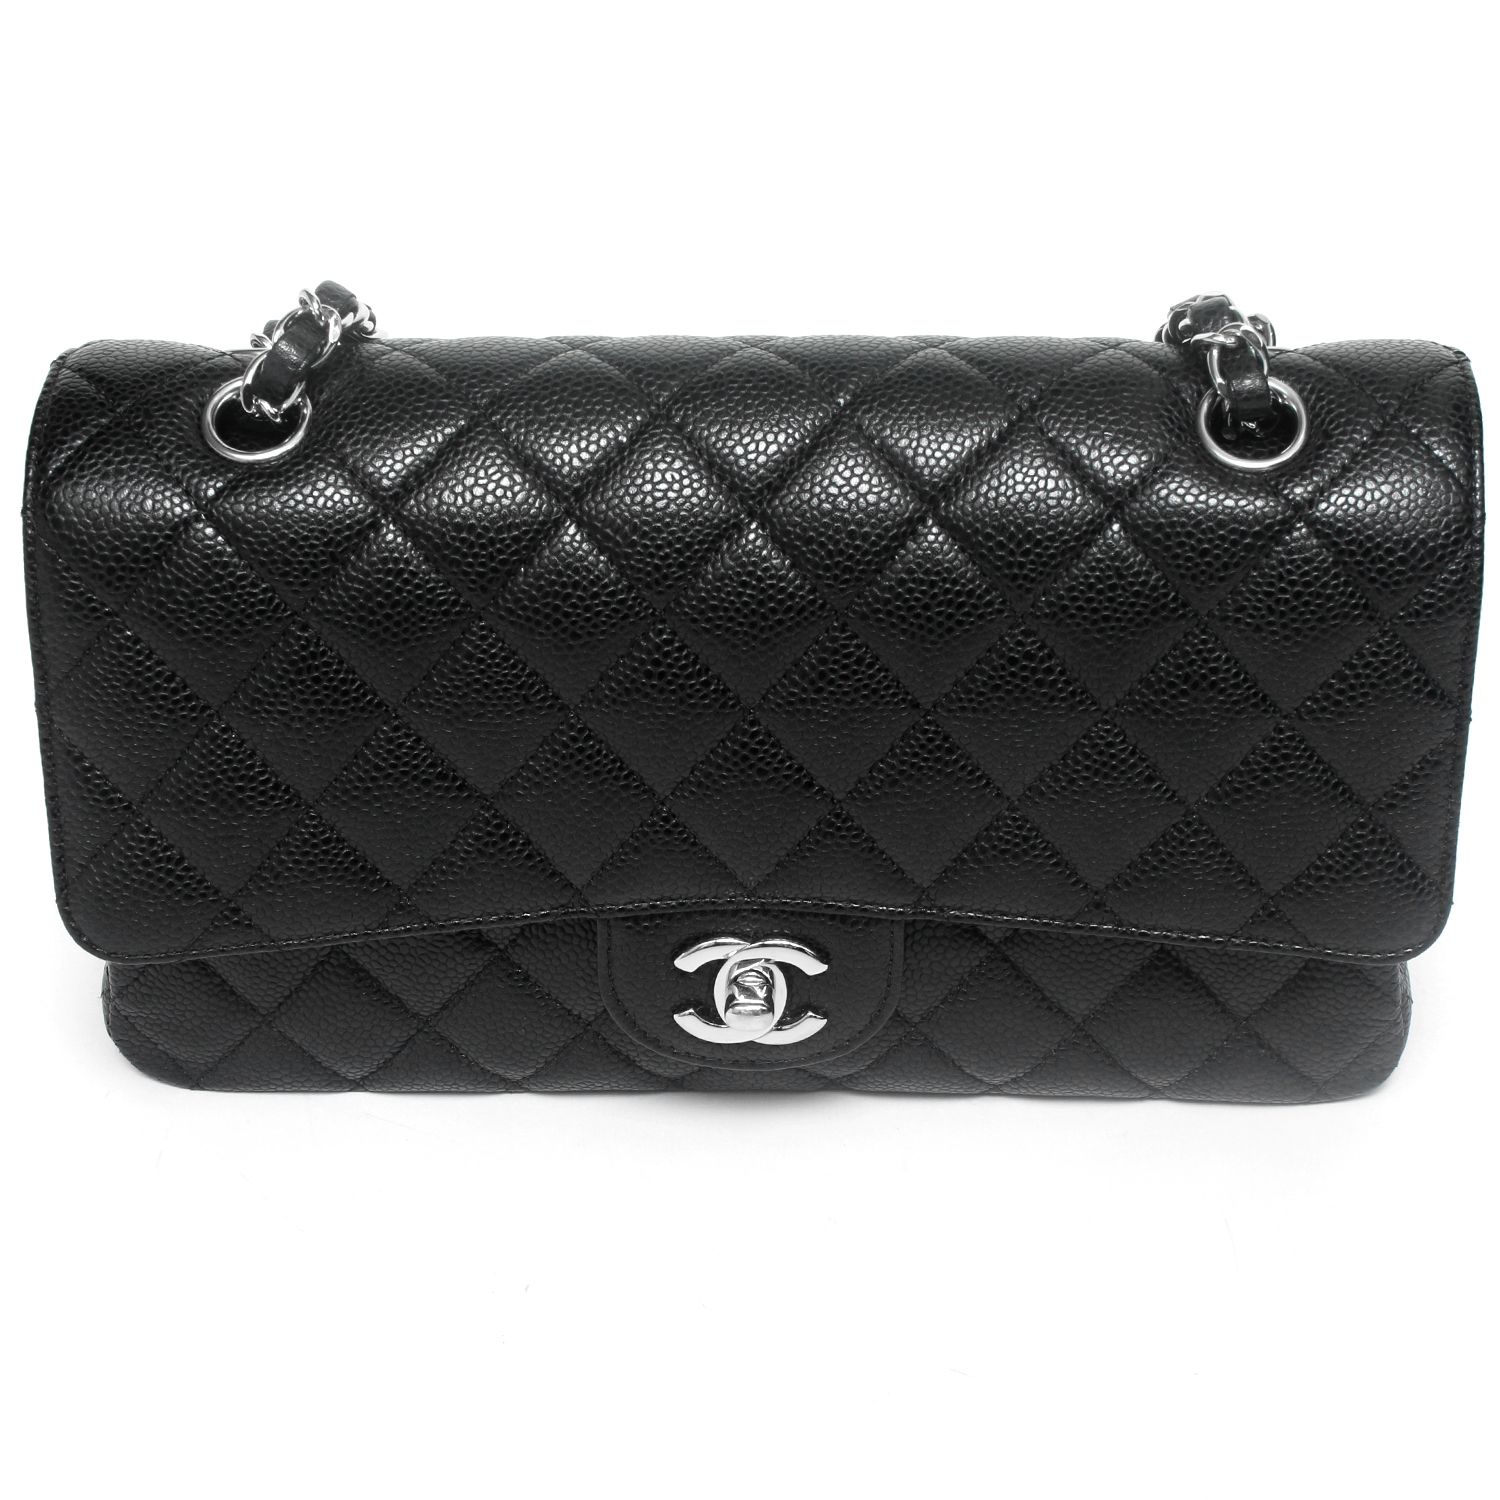 chanel black quilted caviar bag